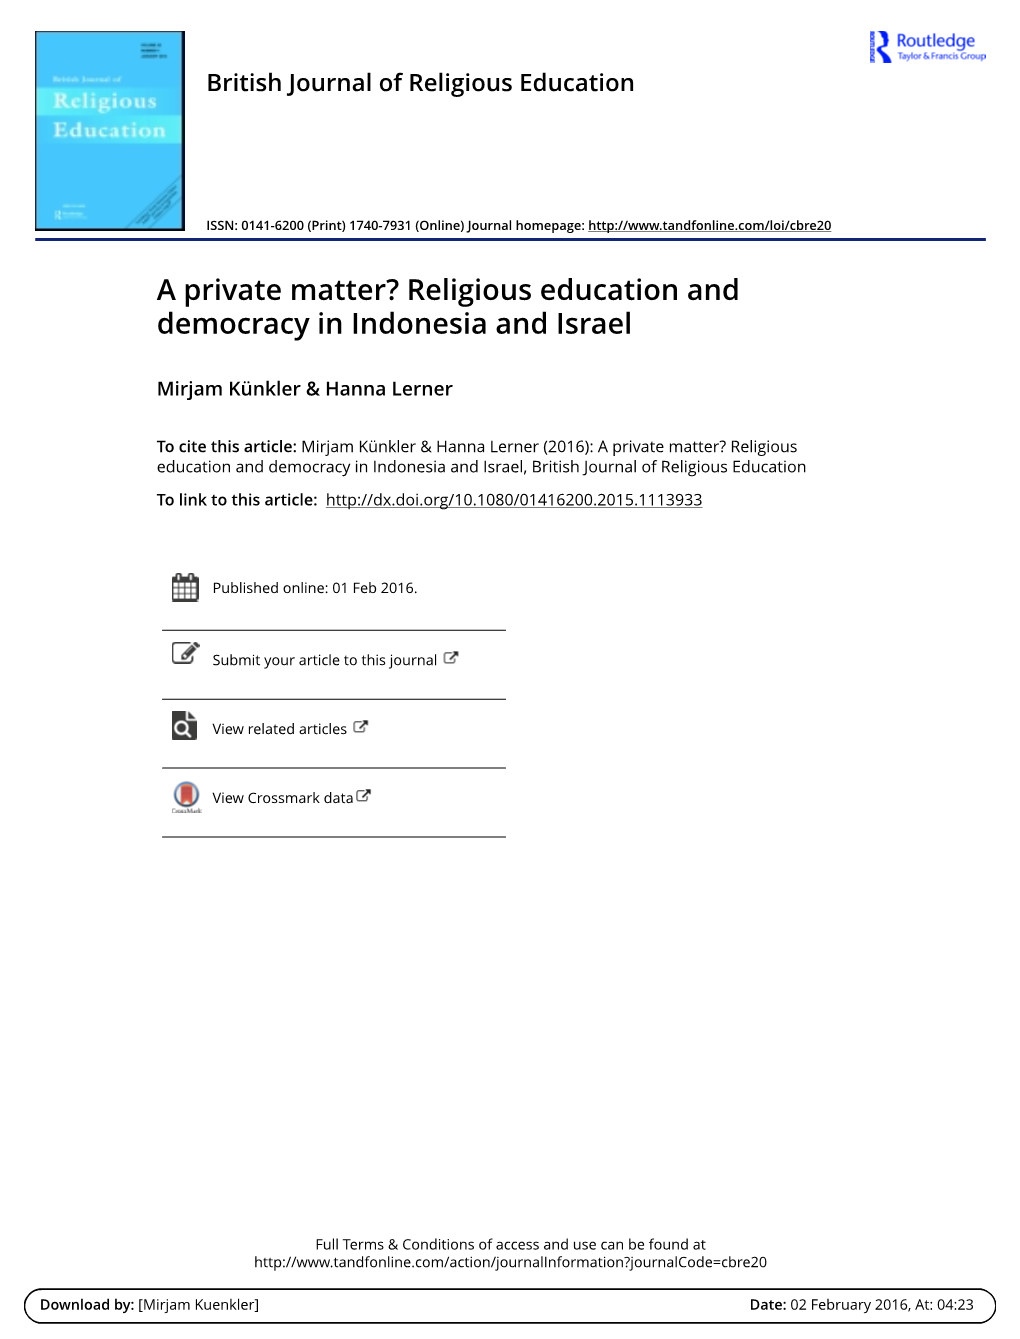 Religious Education and Democracy in Indonesia and Israel